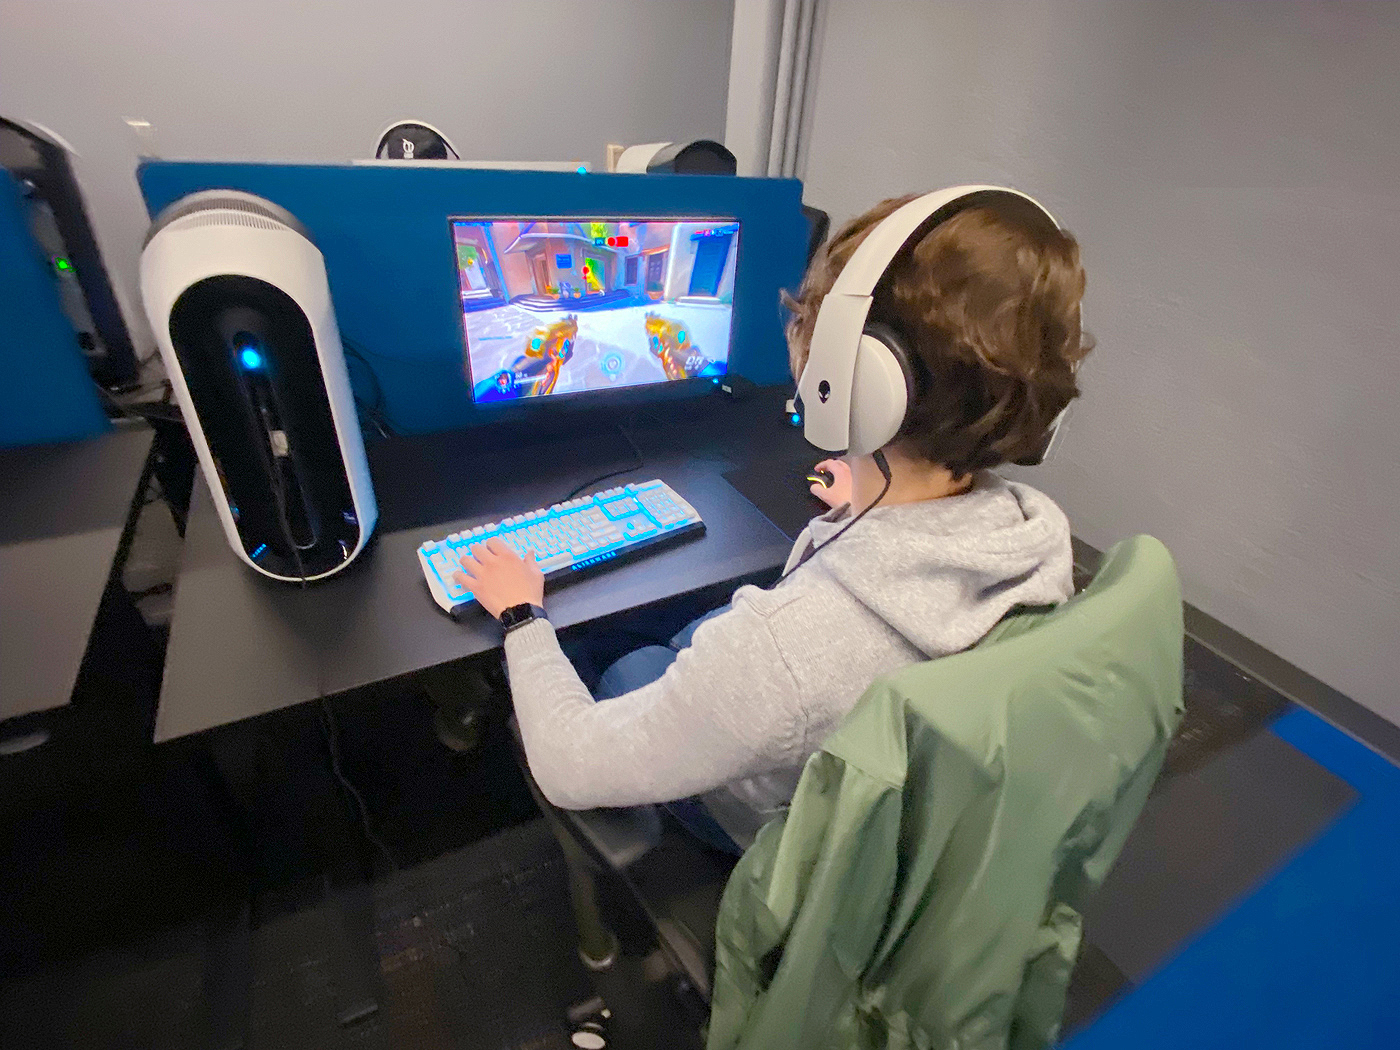 Each of the 25 gaming stations provides the same high-powered gaming PCs, enabling the student to have a personal gaming experience, play head to head with another, or form a team for group play and competitive events.